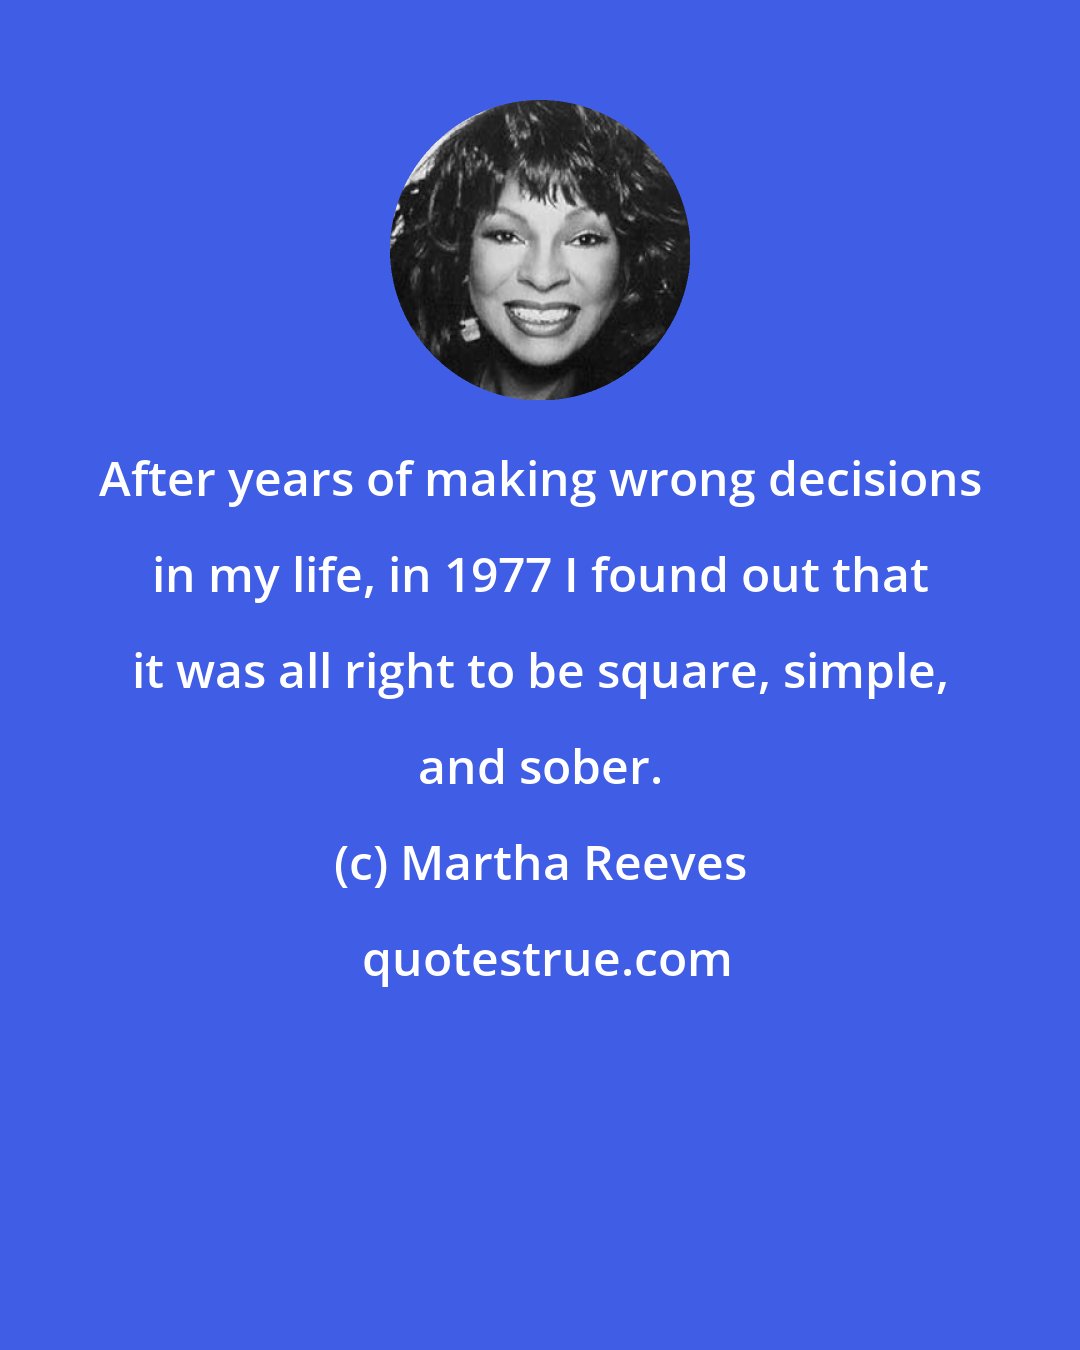 Martha Reeves: After years of making wrong decisions in my life, in 1977 I found out that it was all right to be square, simple, and sober.